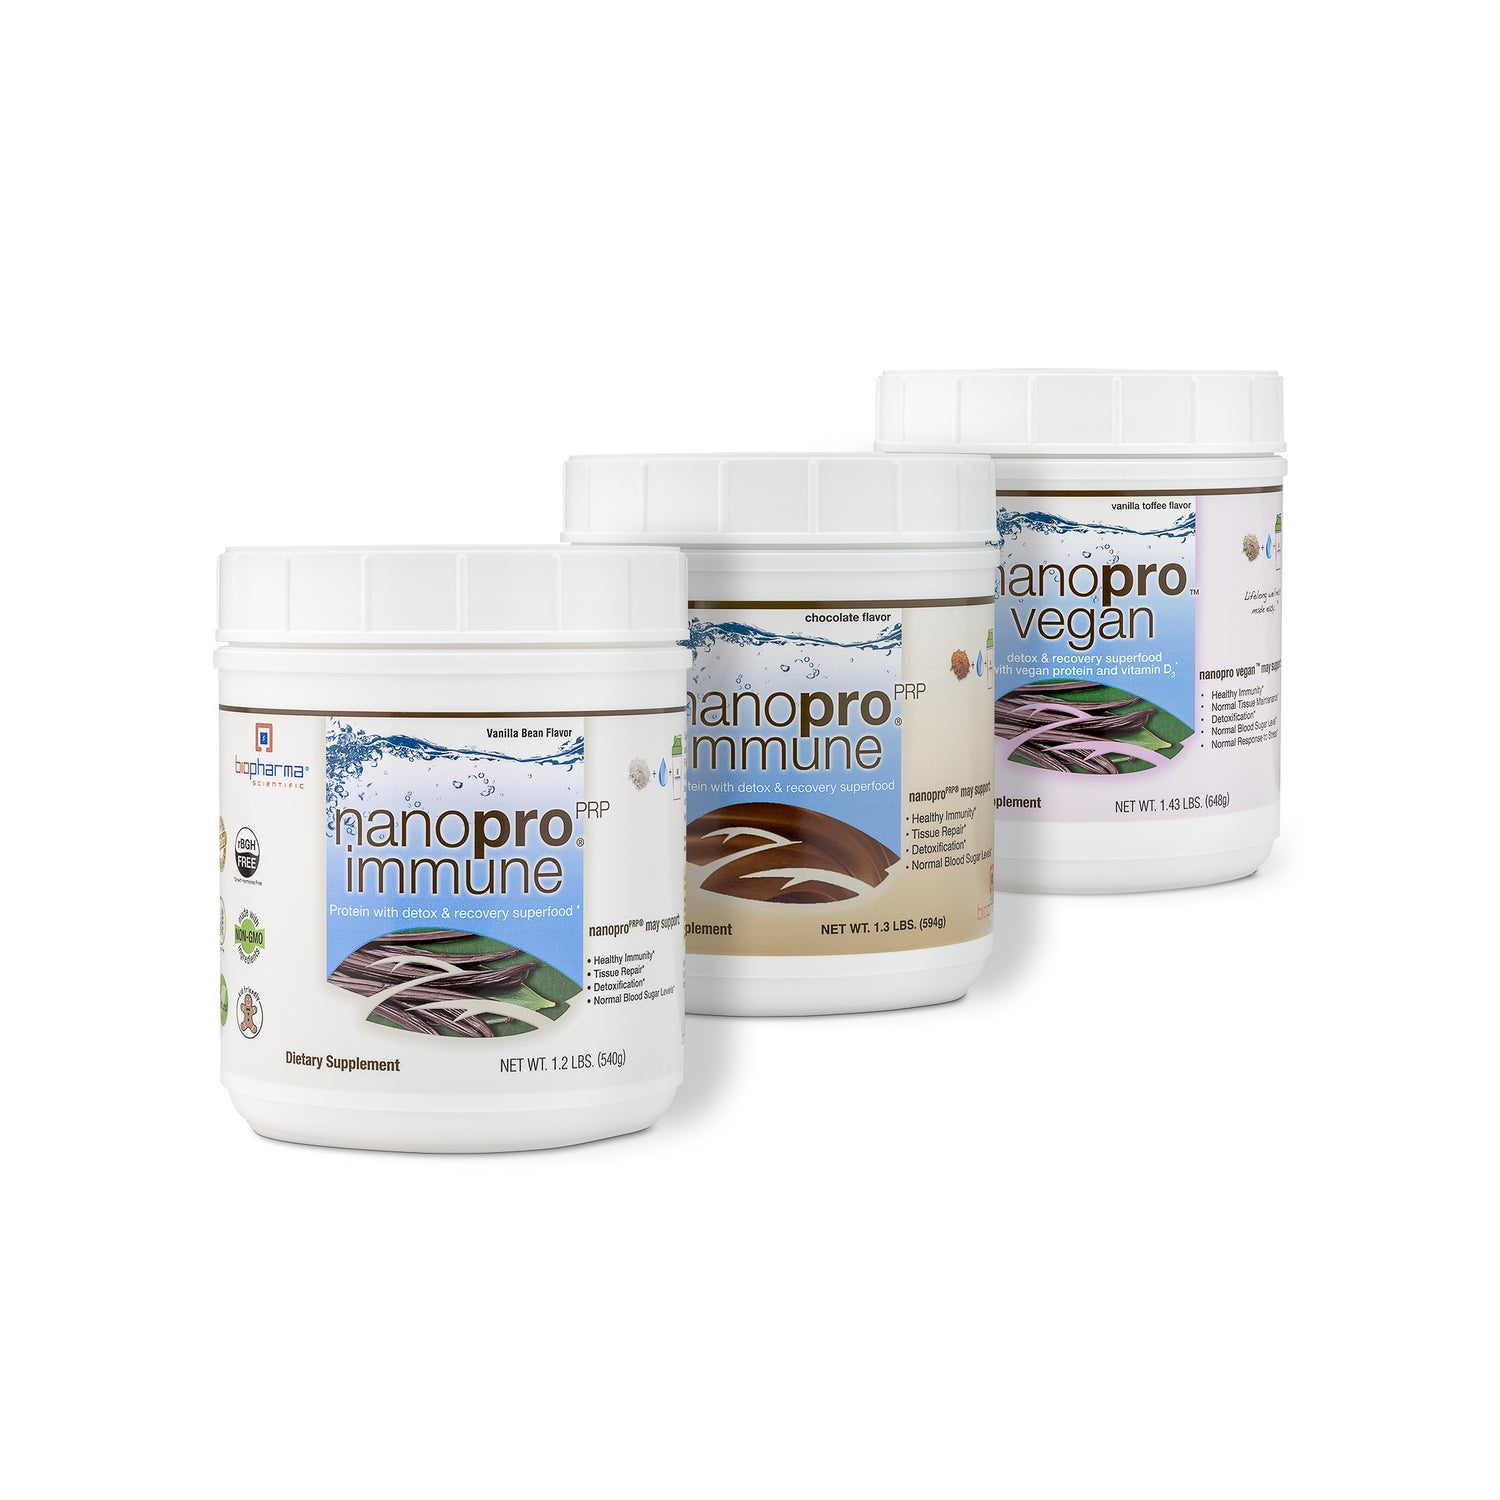 all nanopro immune whey and vegan protein powder supplements with detox and recovery superfood